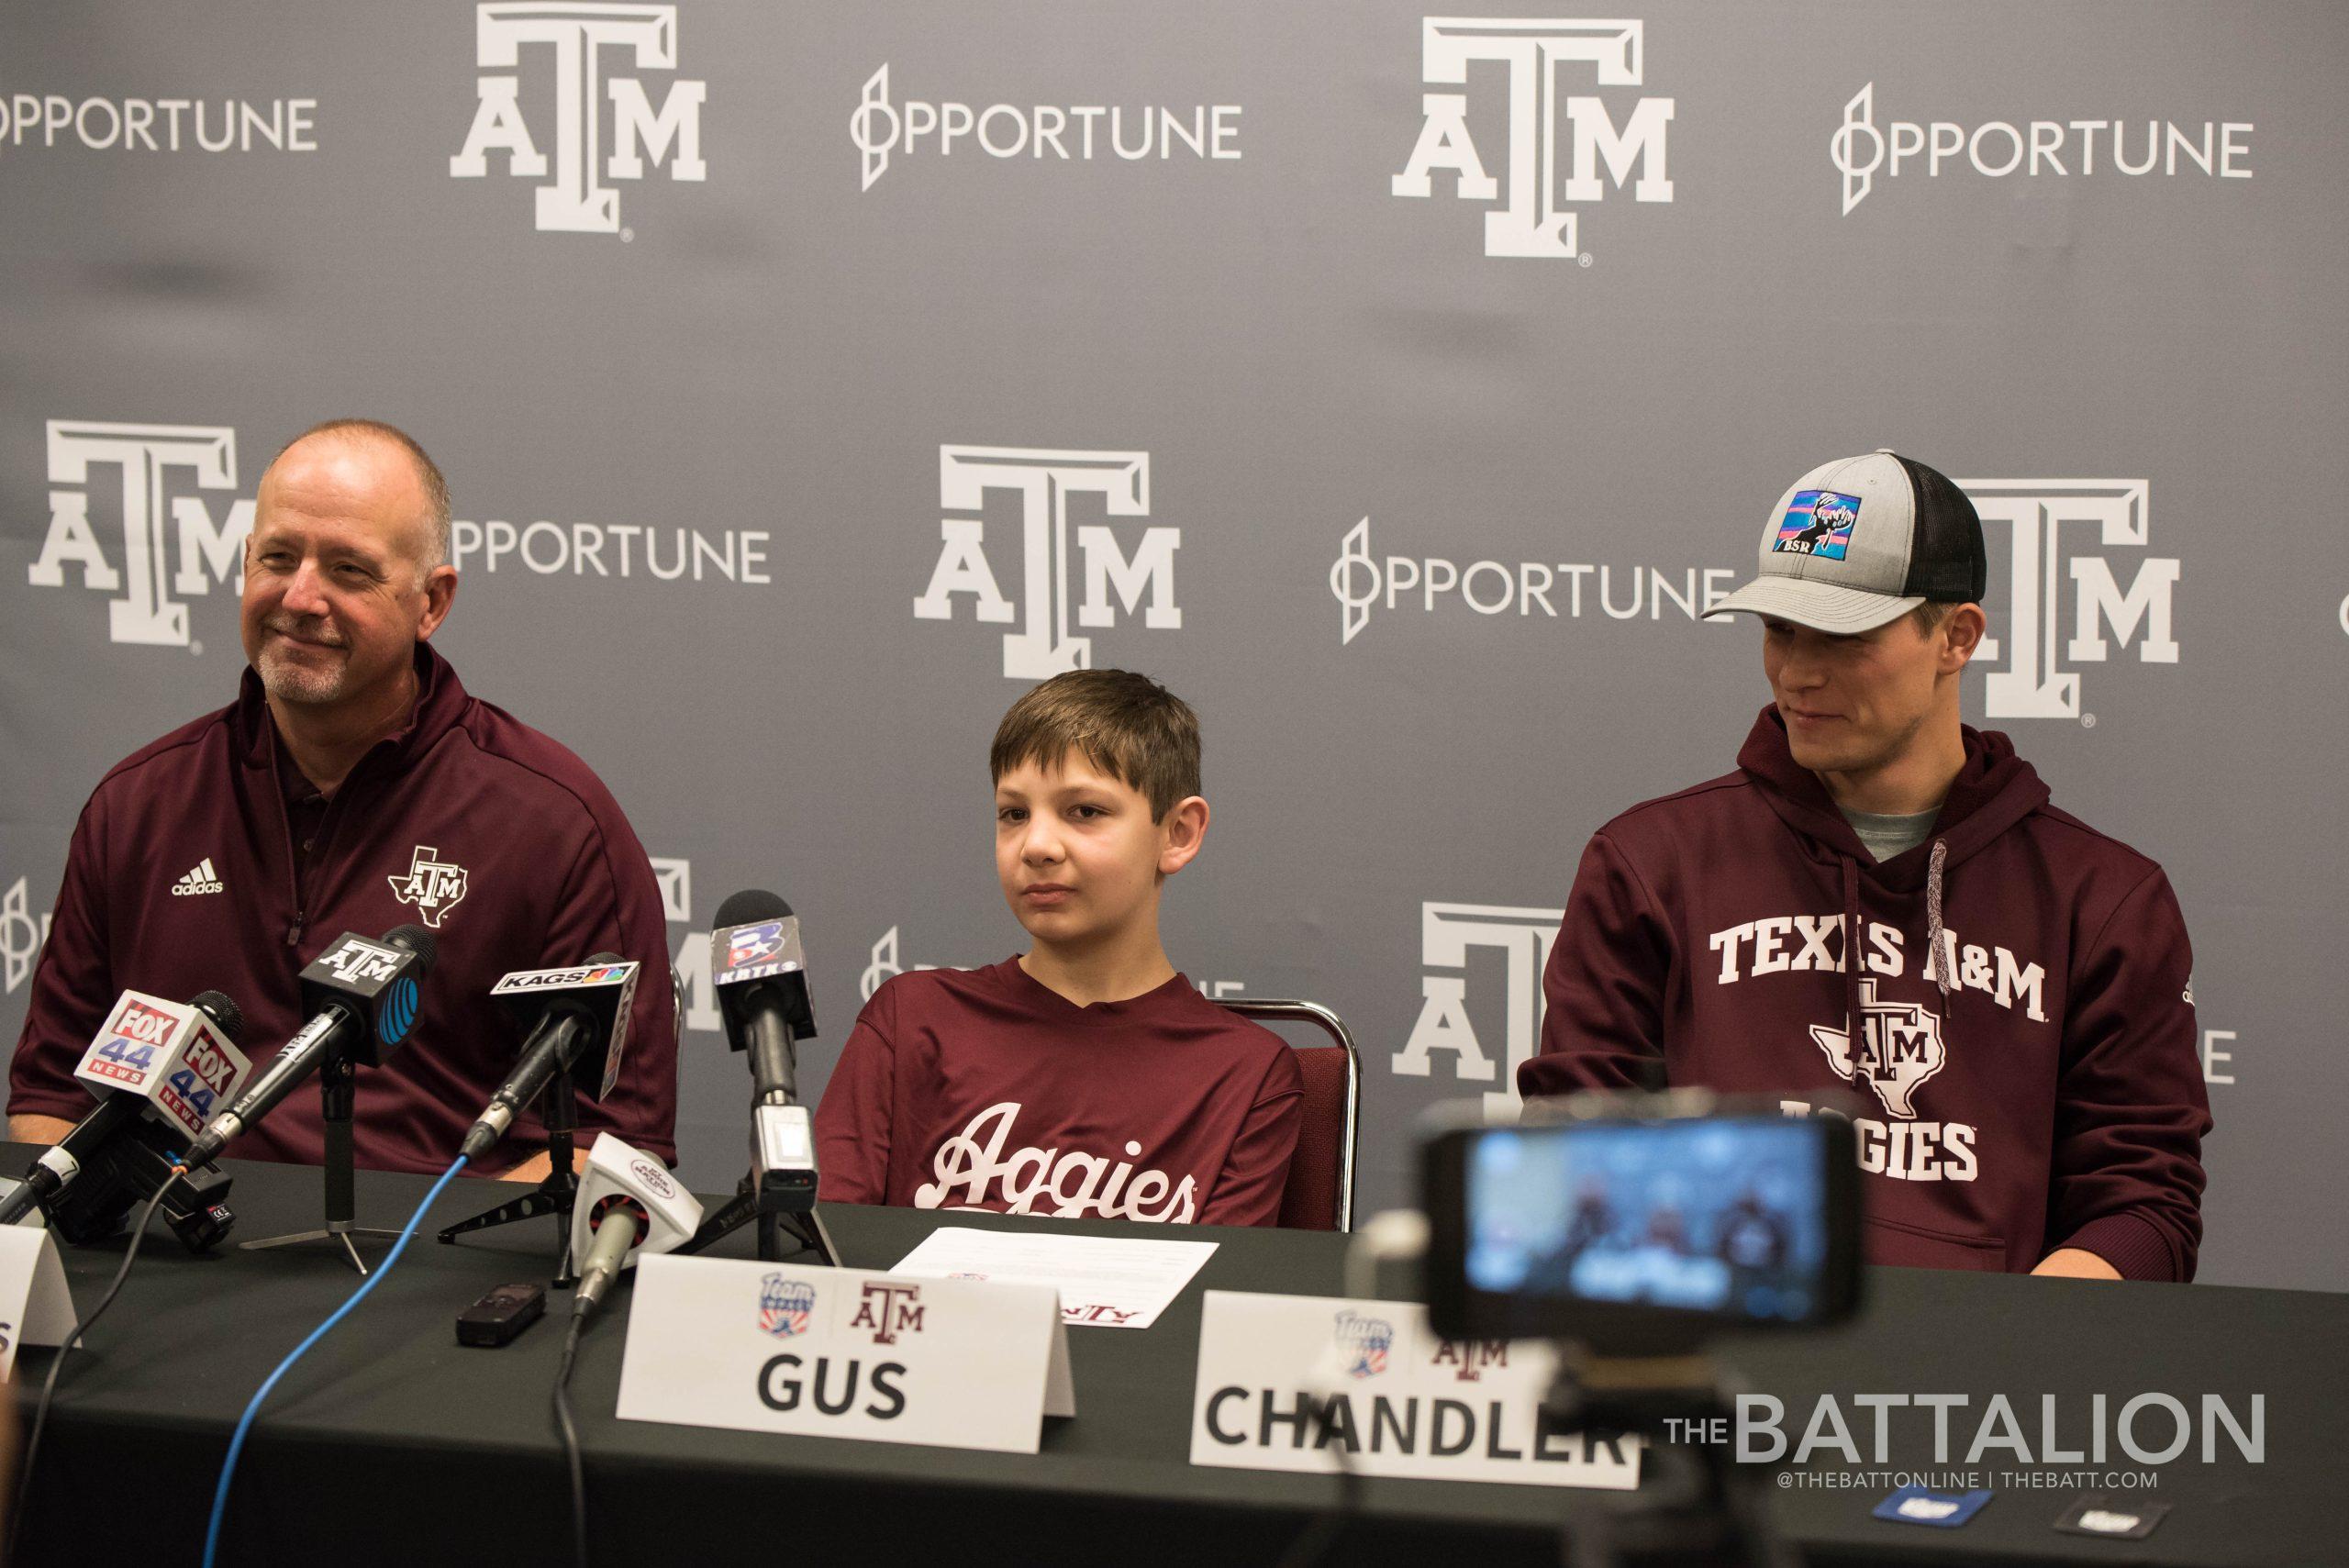 Aggies+add+honorary+teammate+to+2019+dugout+as+part+of+Team+IMPACT+initiative